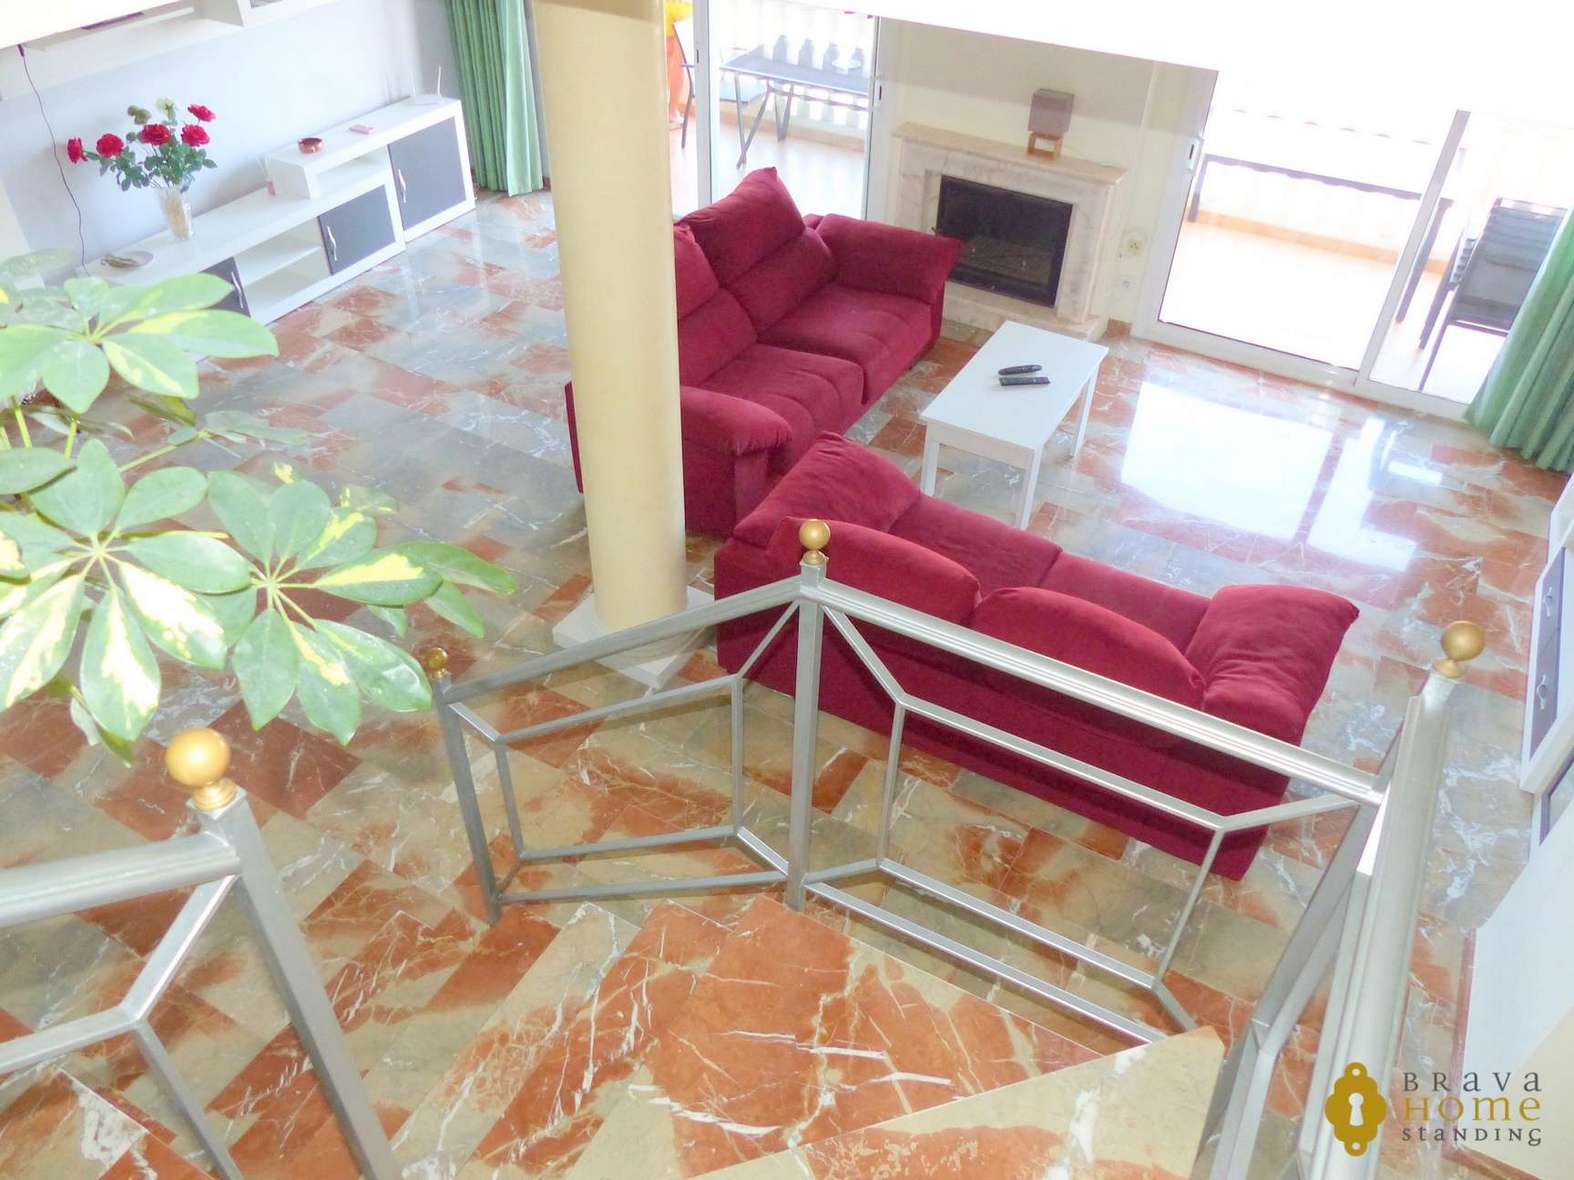 Luxurious penthouse in 1st line of sea, for sale in Empuriabrava